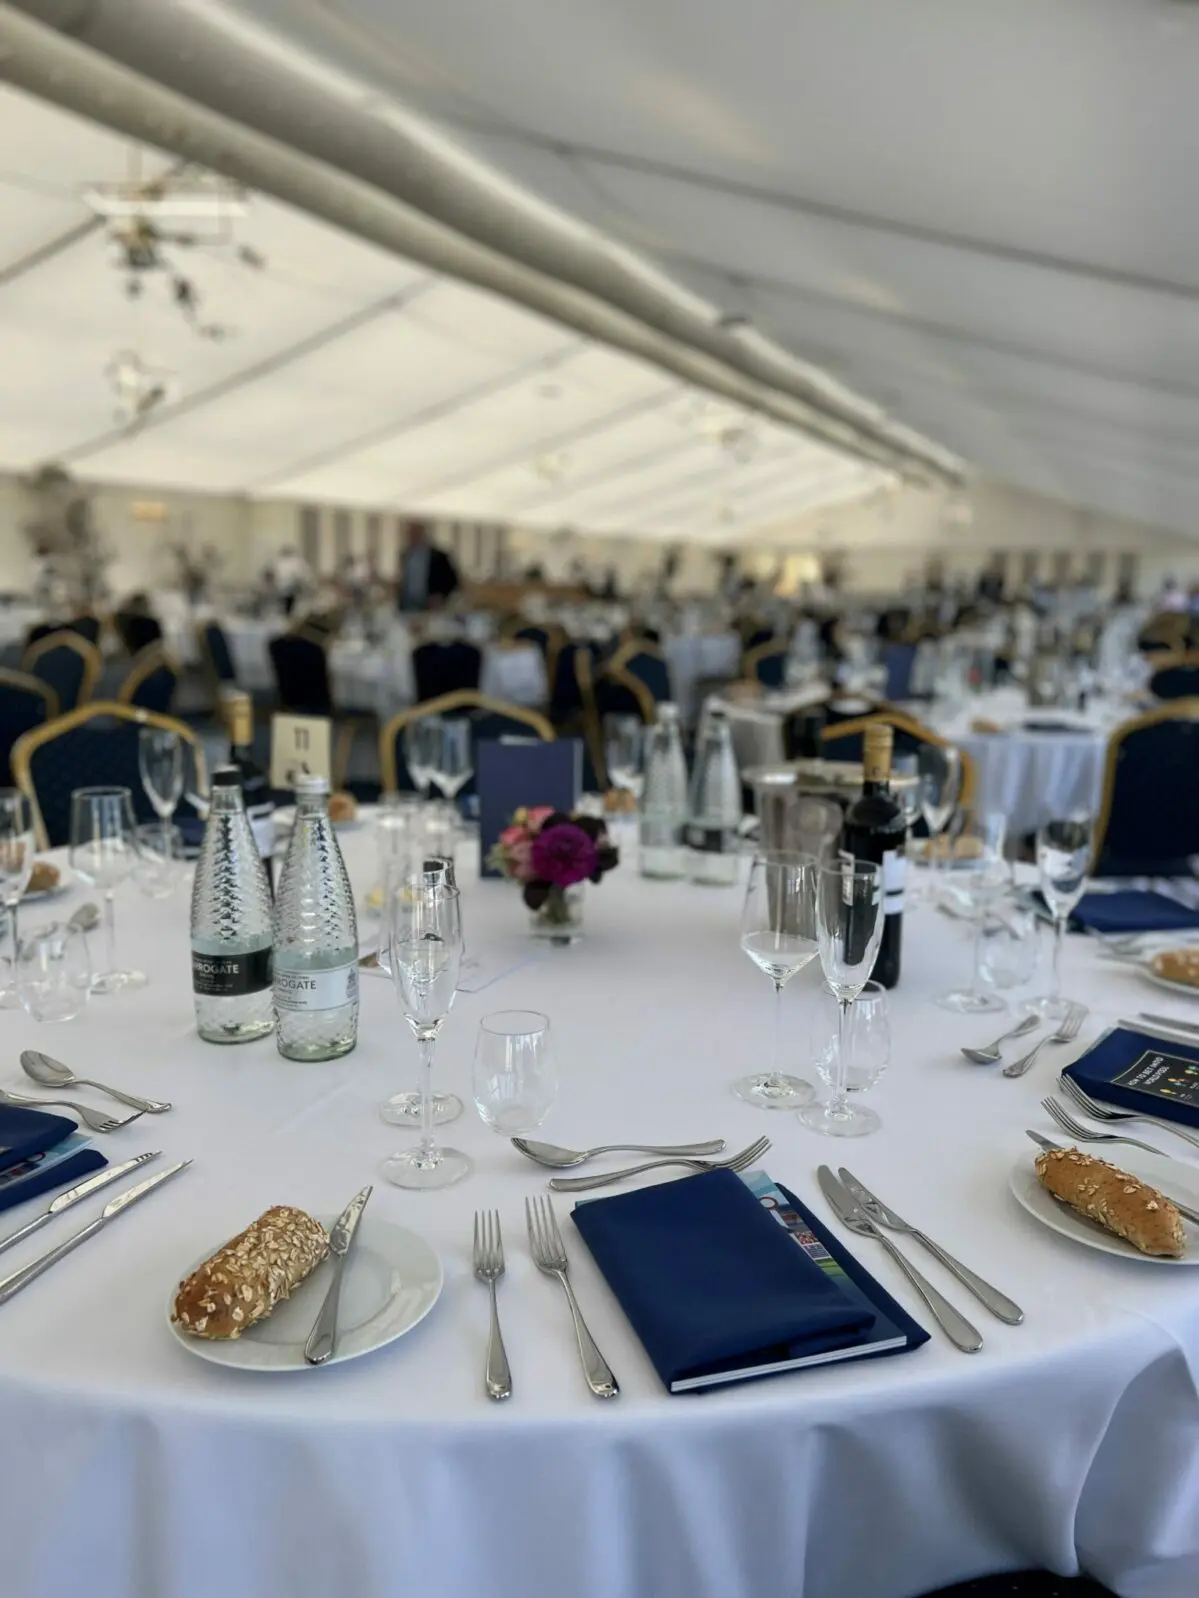 The Furlong restaurant, tables laid for service awaiting guests' arrival